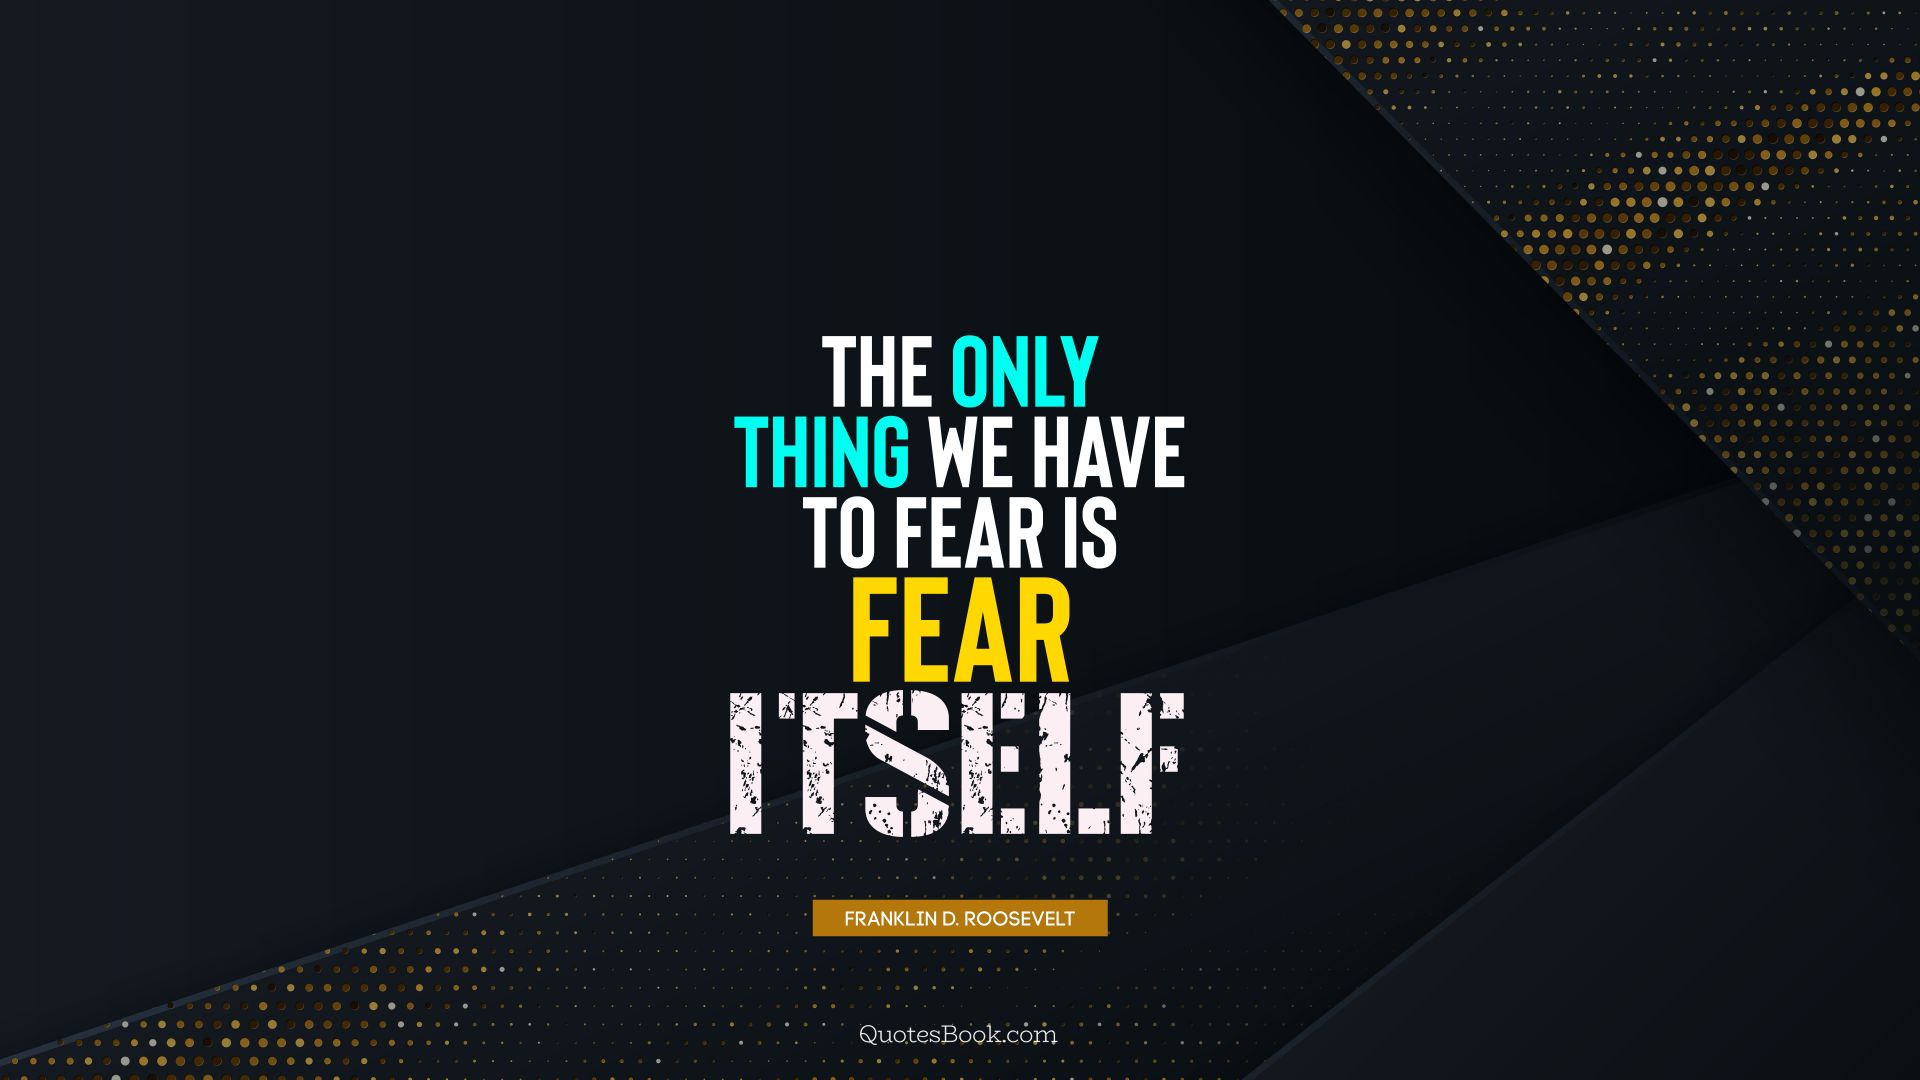 The only thing we have to fear is fear itself. - Quote by Franklin D. Roosevelt